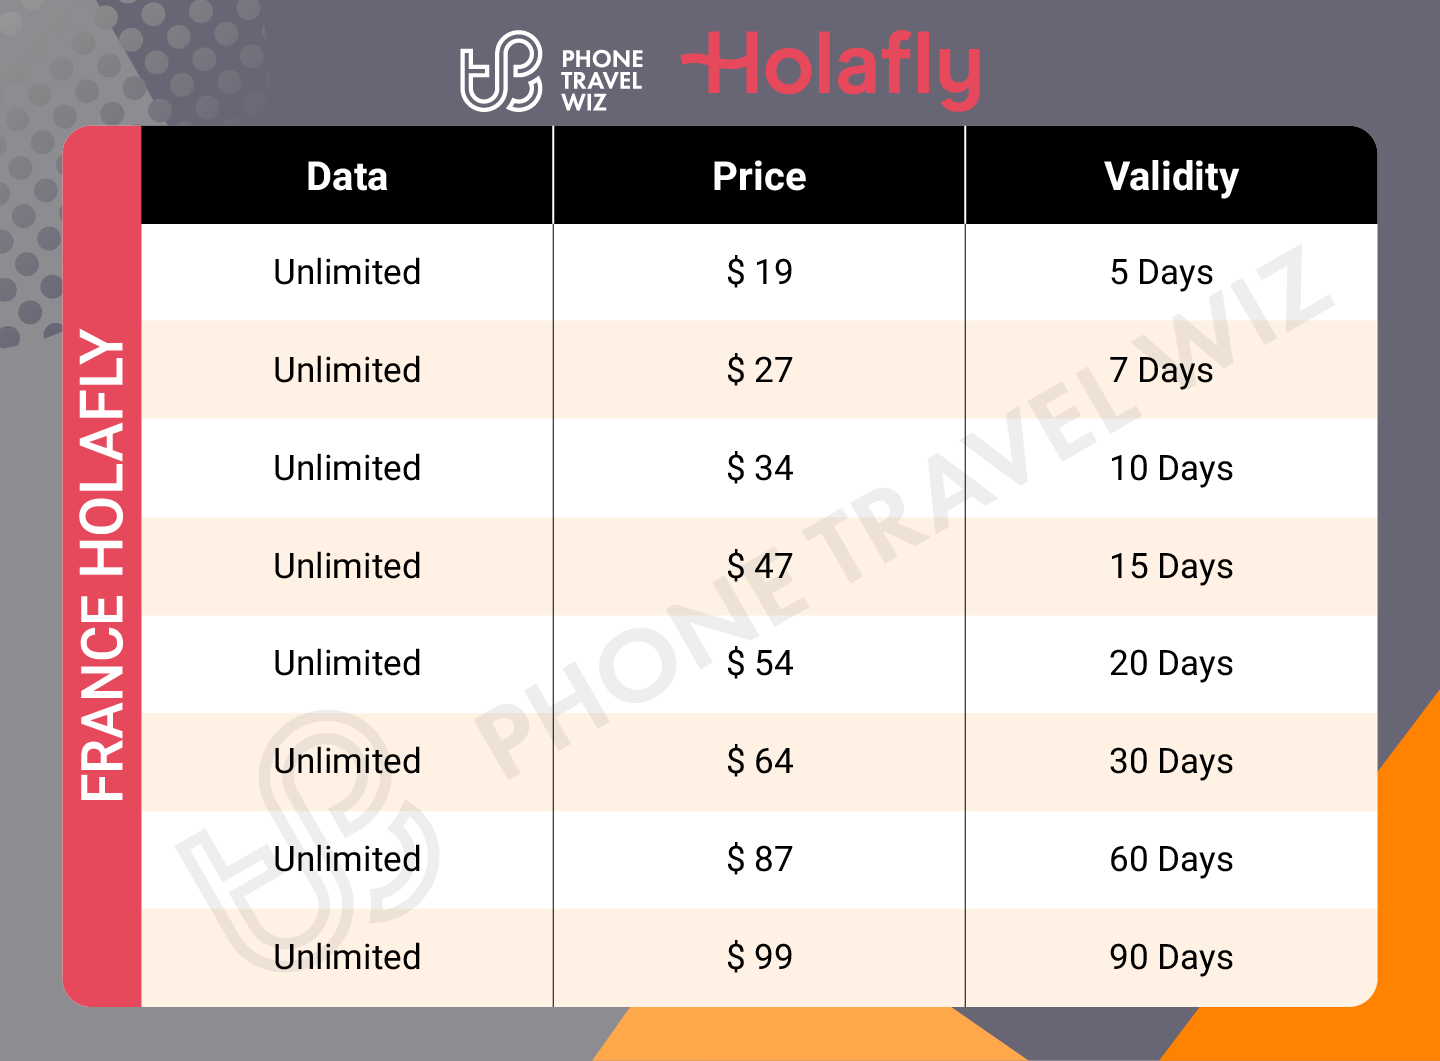 Holafly France eSIM Price & Data Details Infographic by Phone Travel Wiz